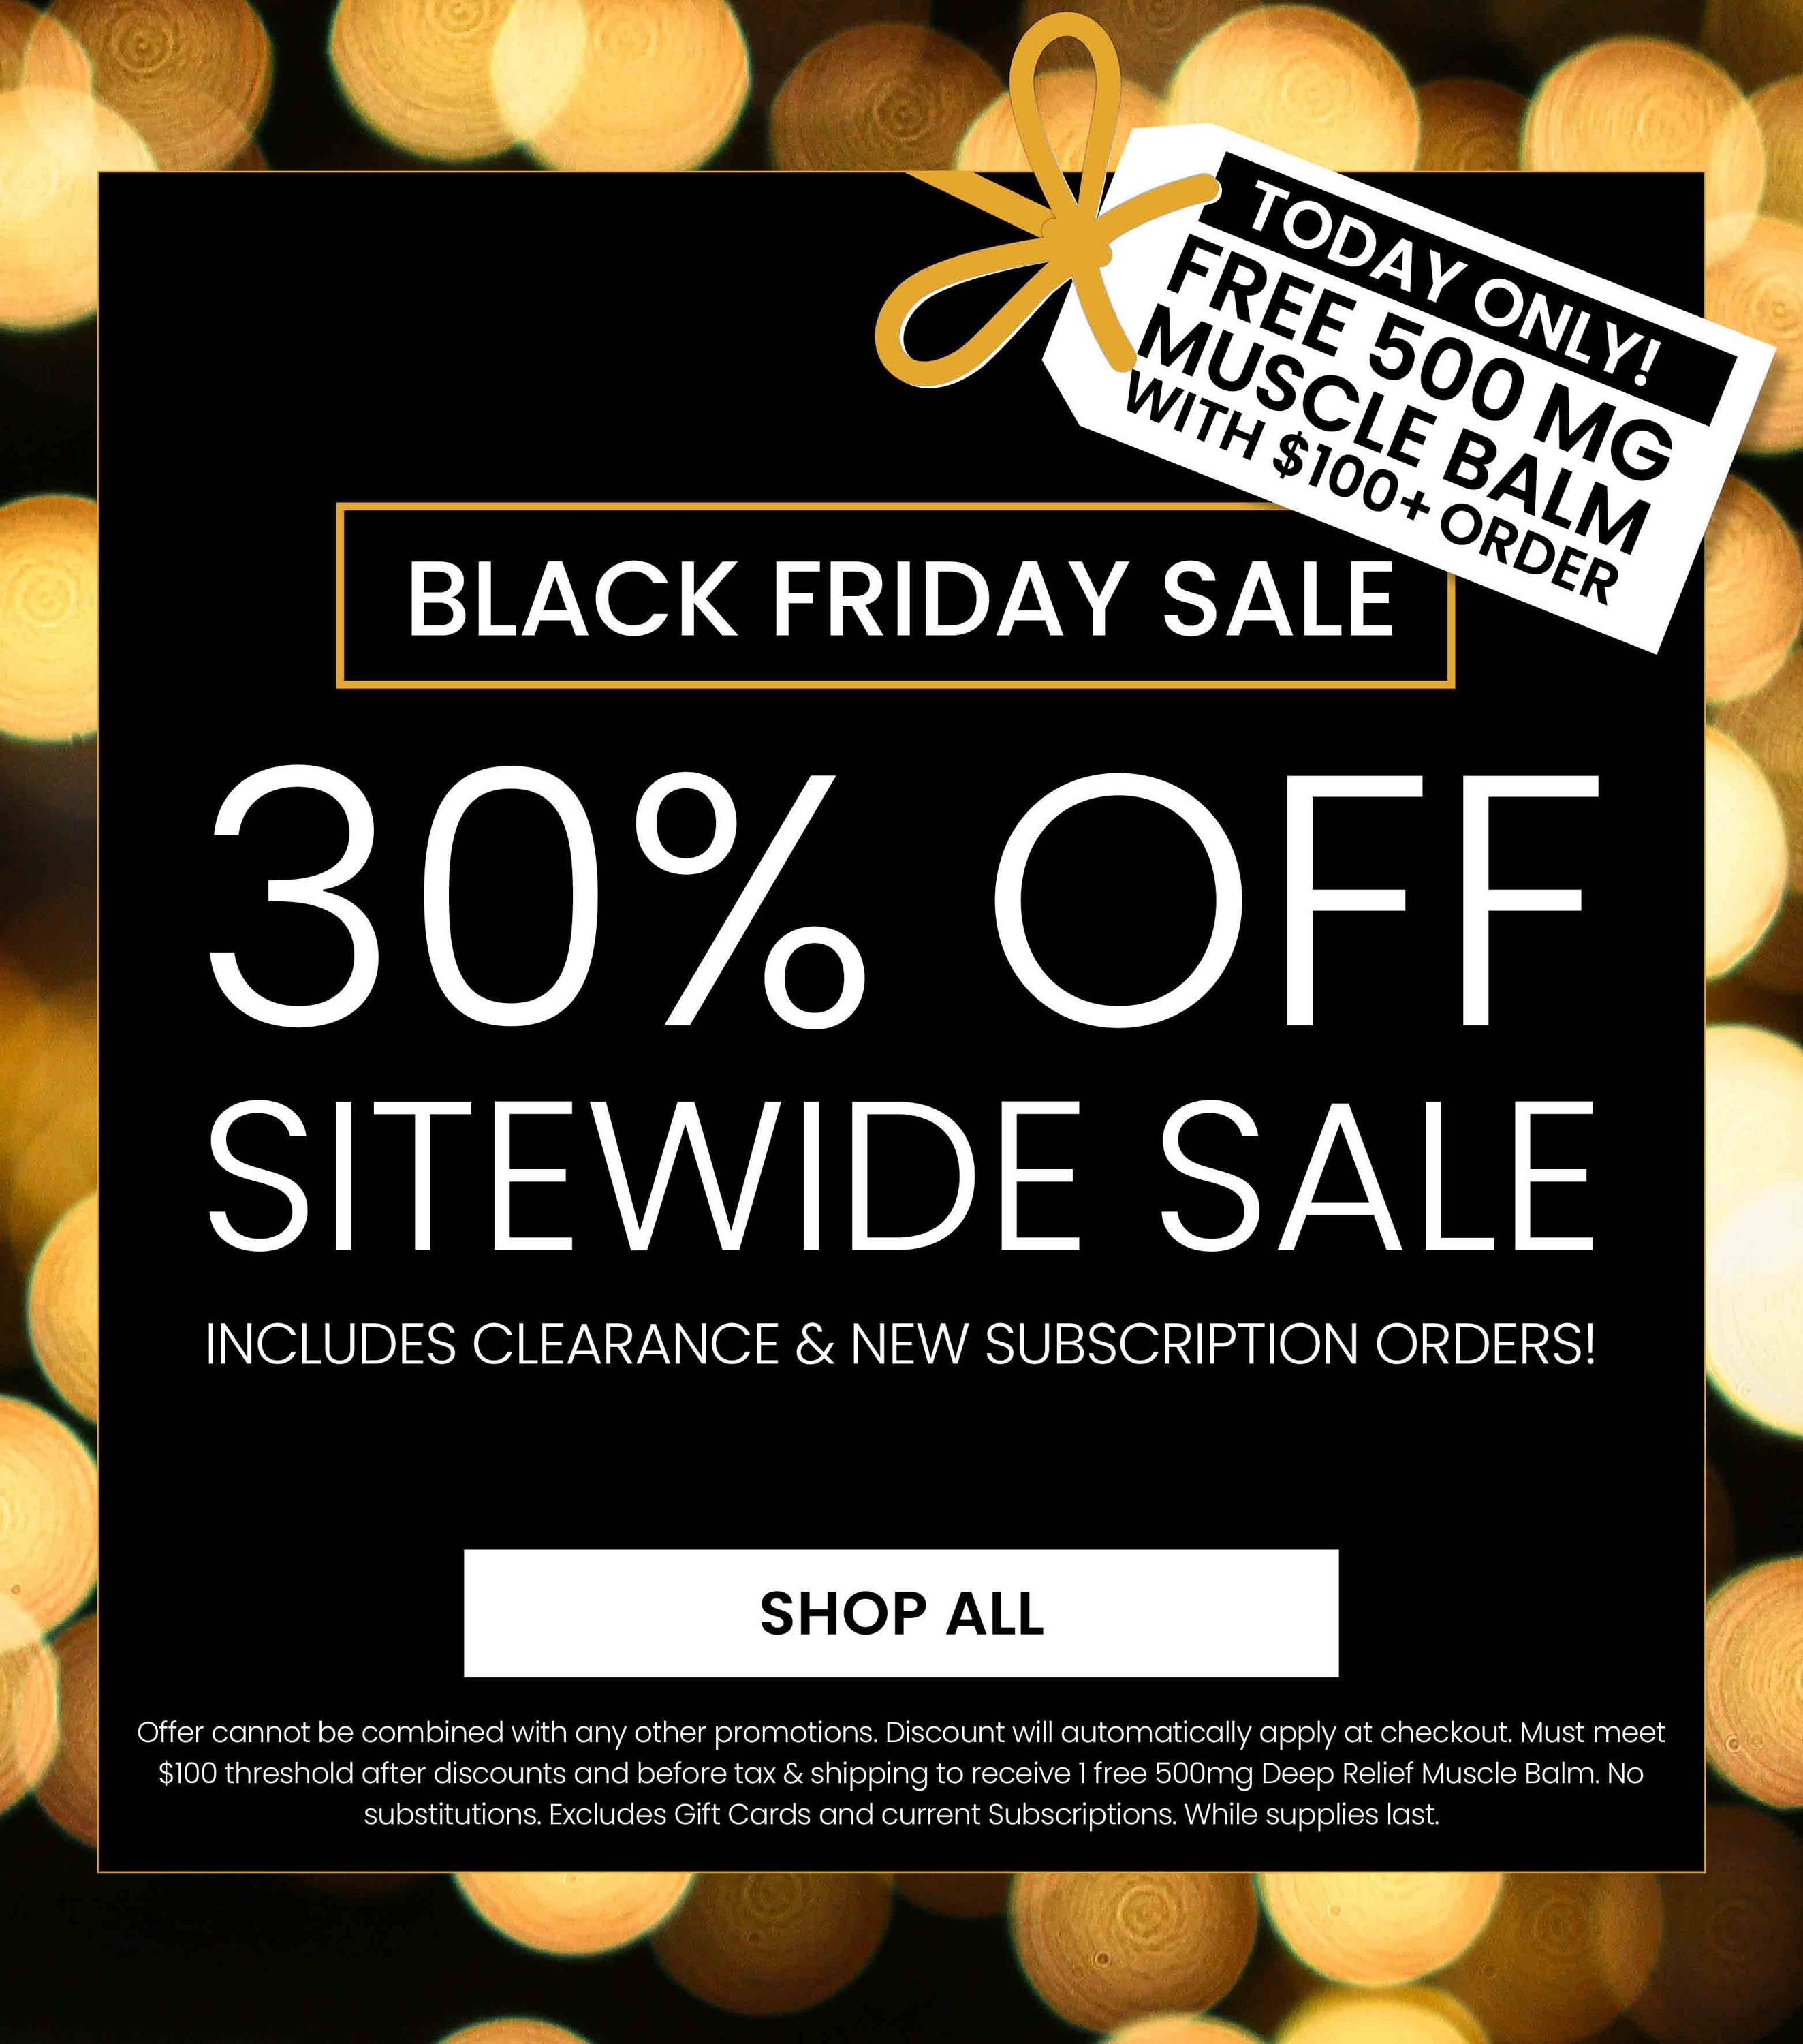 30% Off Sitewide Black Friday Sale. Today Only! Free 500mg Muscle Balm with $100+ Orders.